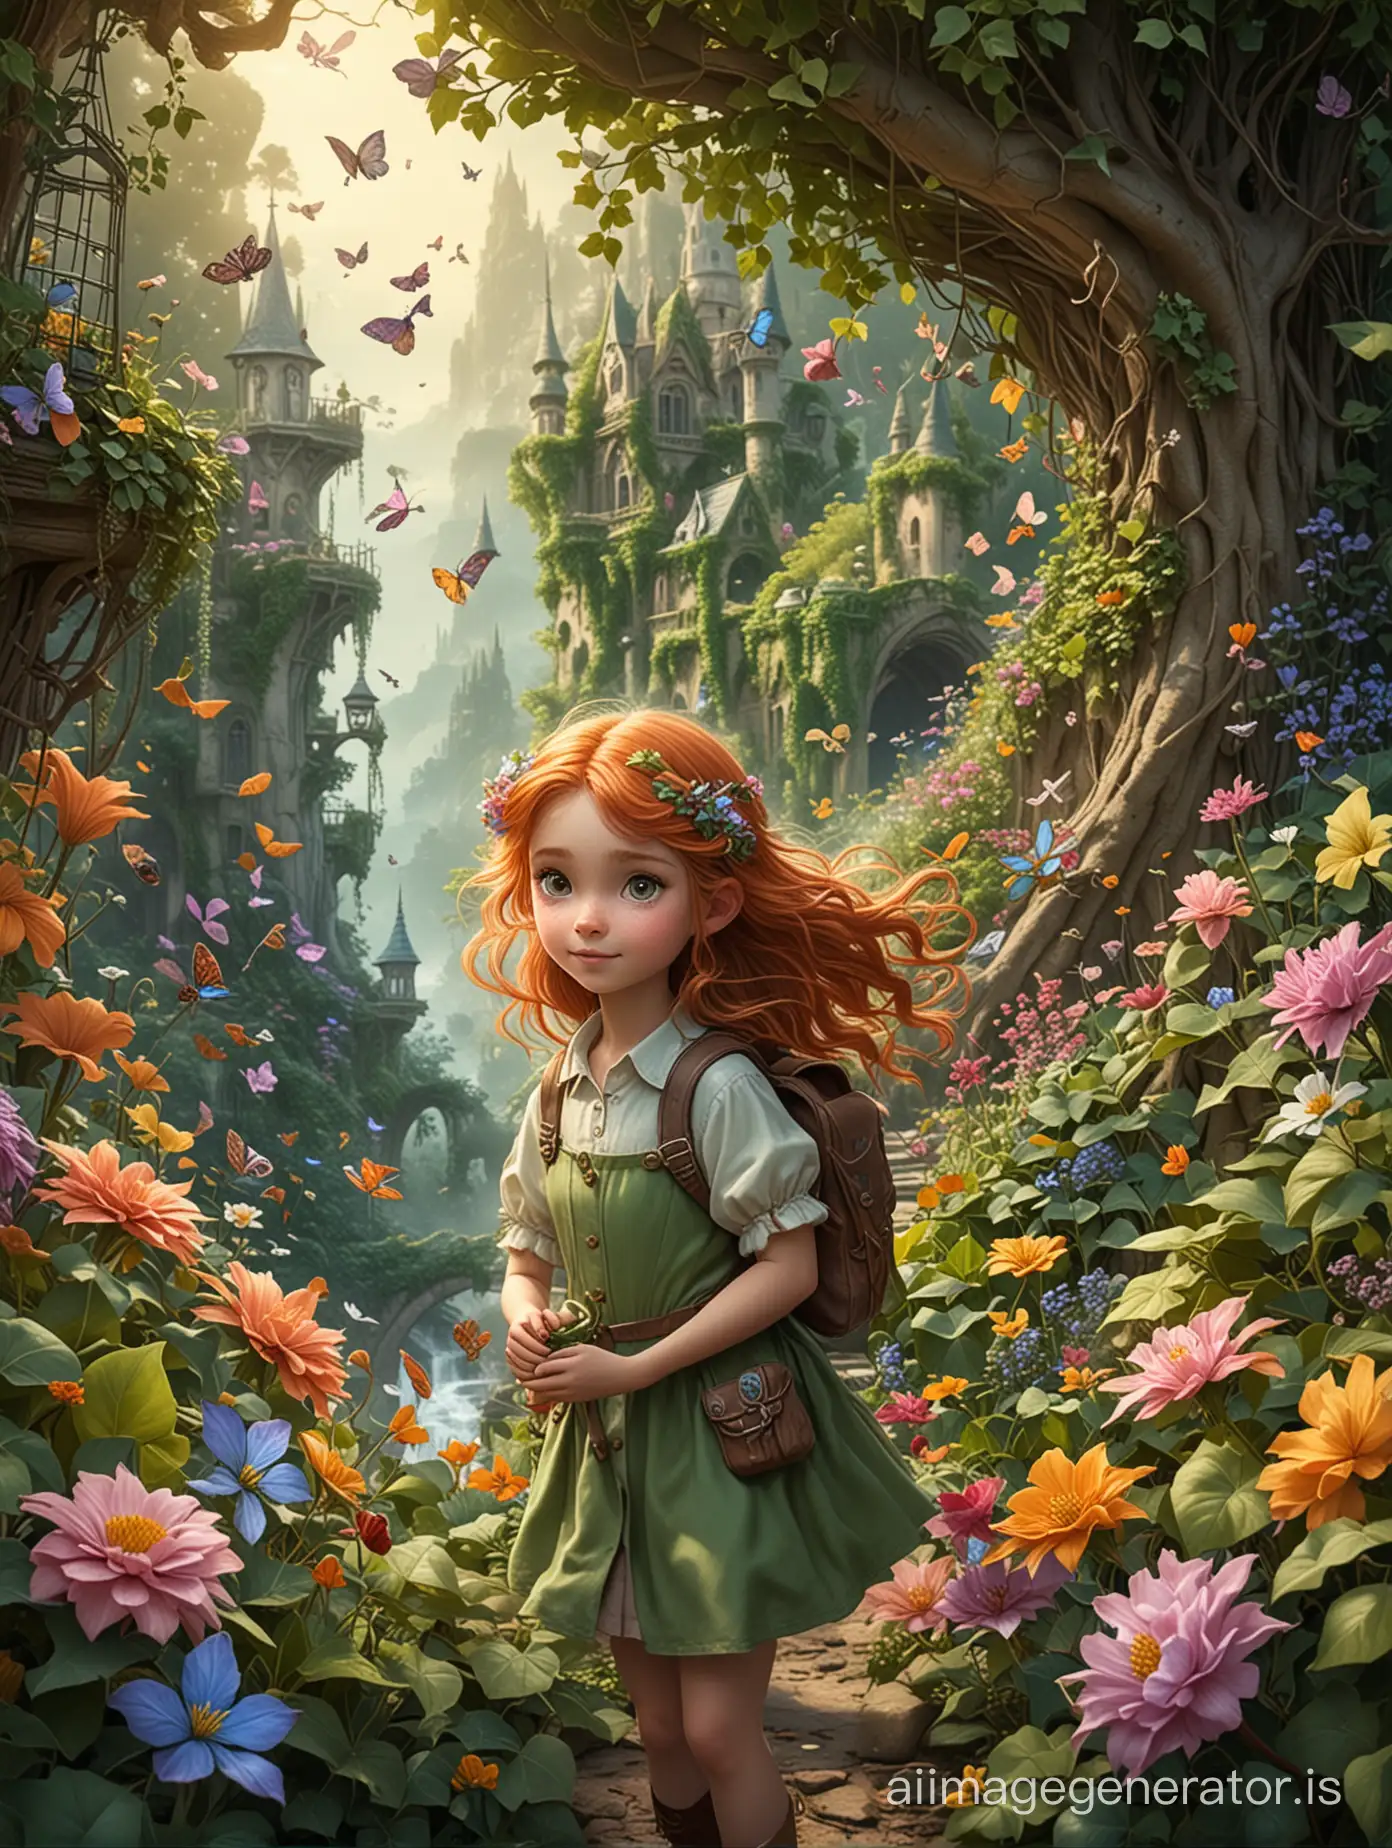 Create a whimsical illustration of Ivy, a young adventurer exploring a magical world filled with wonders and enchantment. Let your imagination roam free as you depict her surrounded by vibrant flowers, majestic trees, and perhaps accompanied by fantastical creatures. Capture the essence of her curiosity and bravery as she embarks on her journey through this fairy-tale landscape." using a pastel color palette, very high detail, Canon 50D, ISO1900, UHD, full figure photo, HDR --seed 2628470536 --ar 9:16 --niji 5 --style expressive --v 5